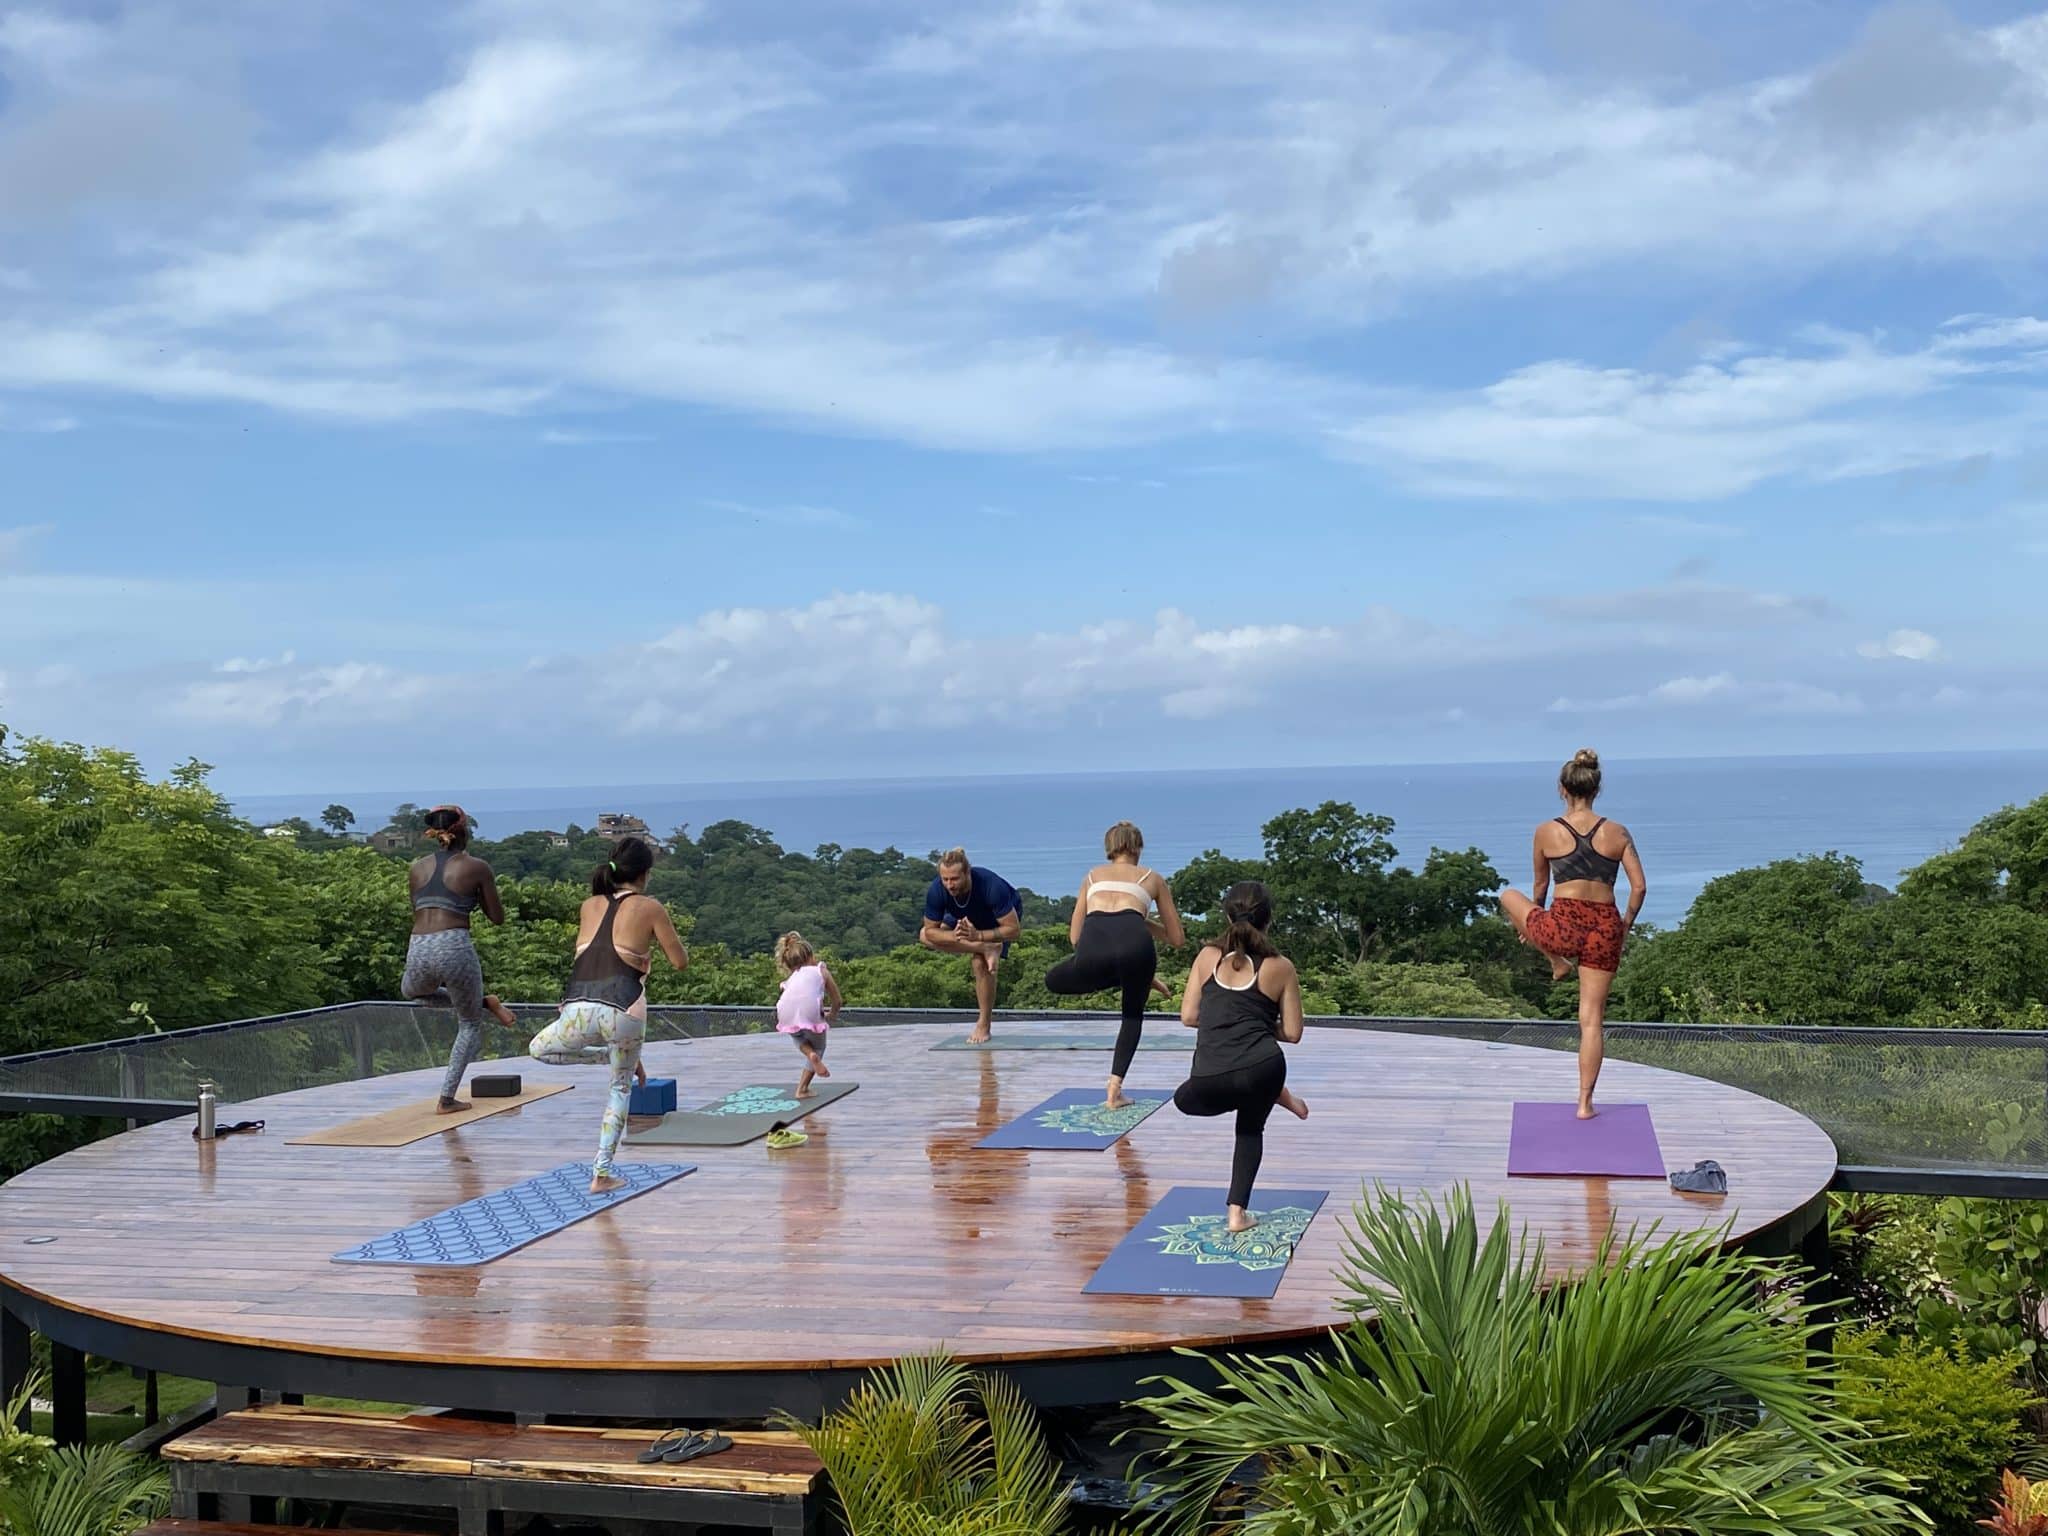 A group of people practising yoga on a round deck with view